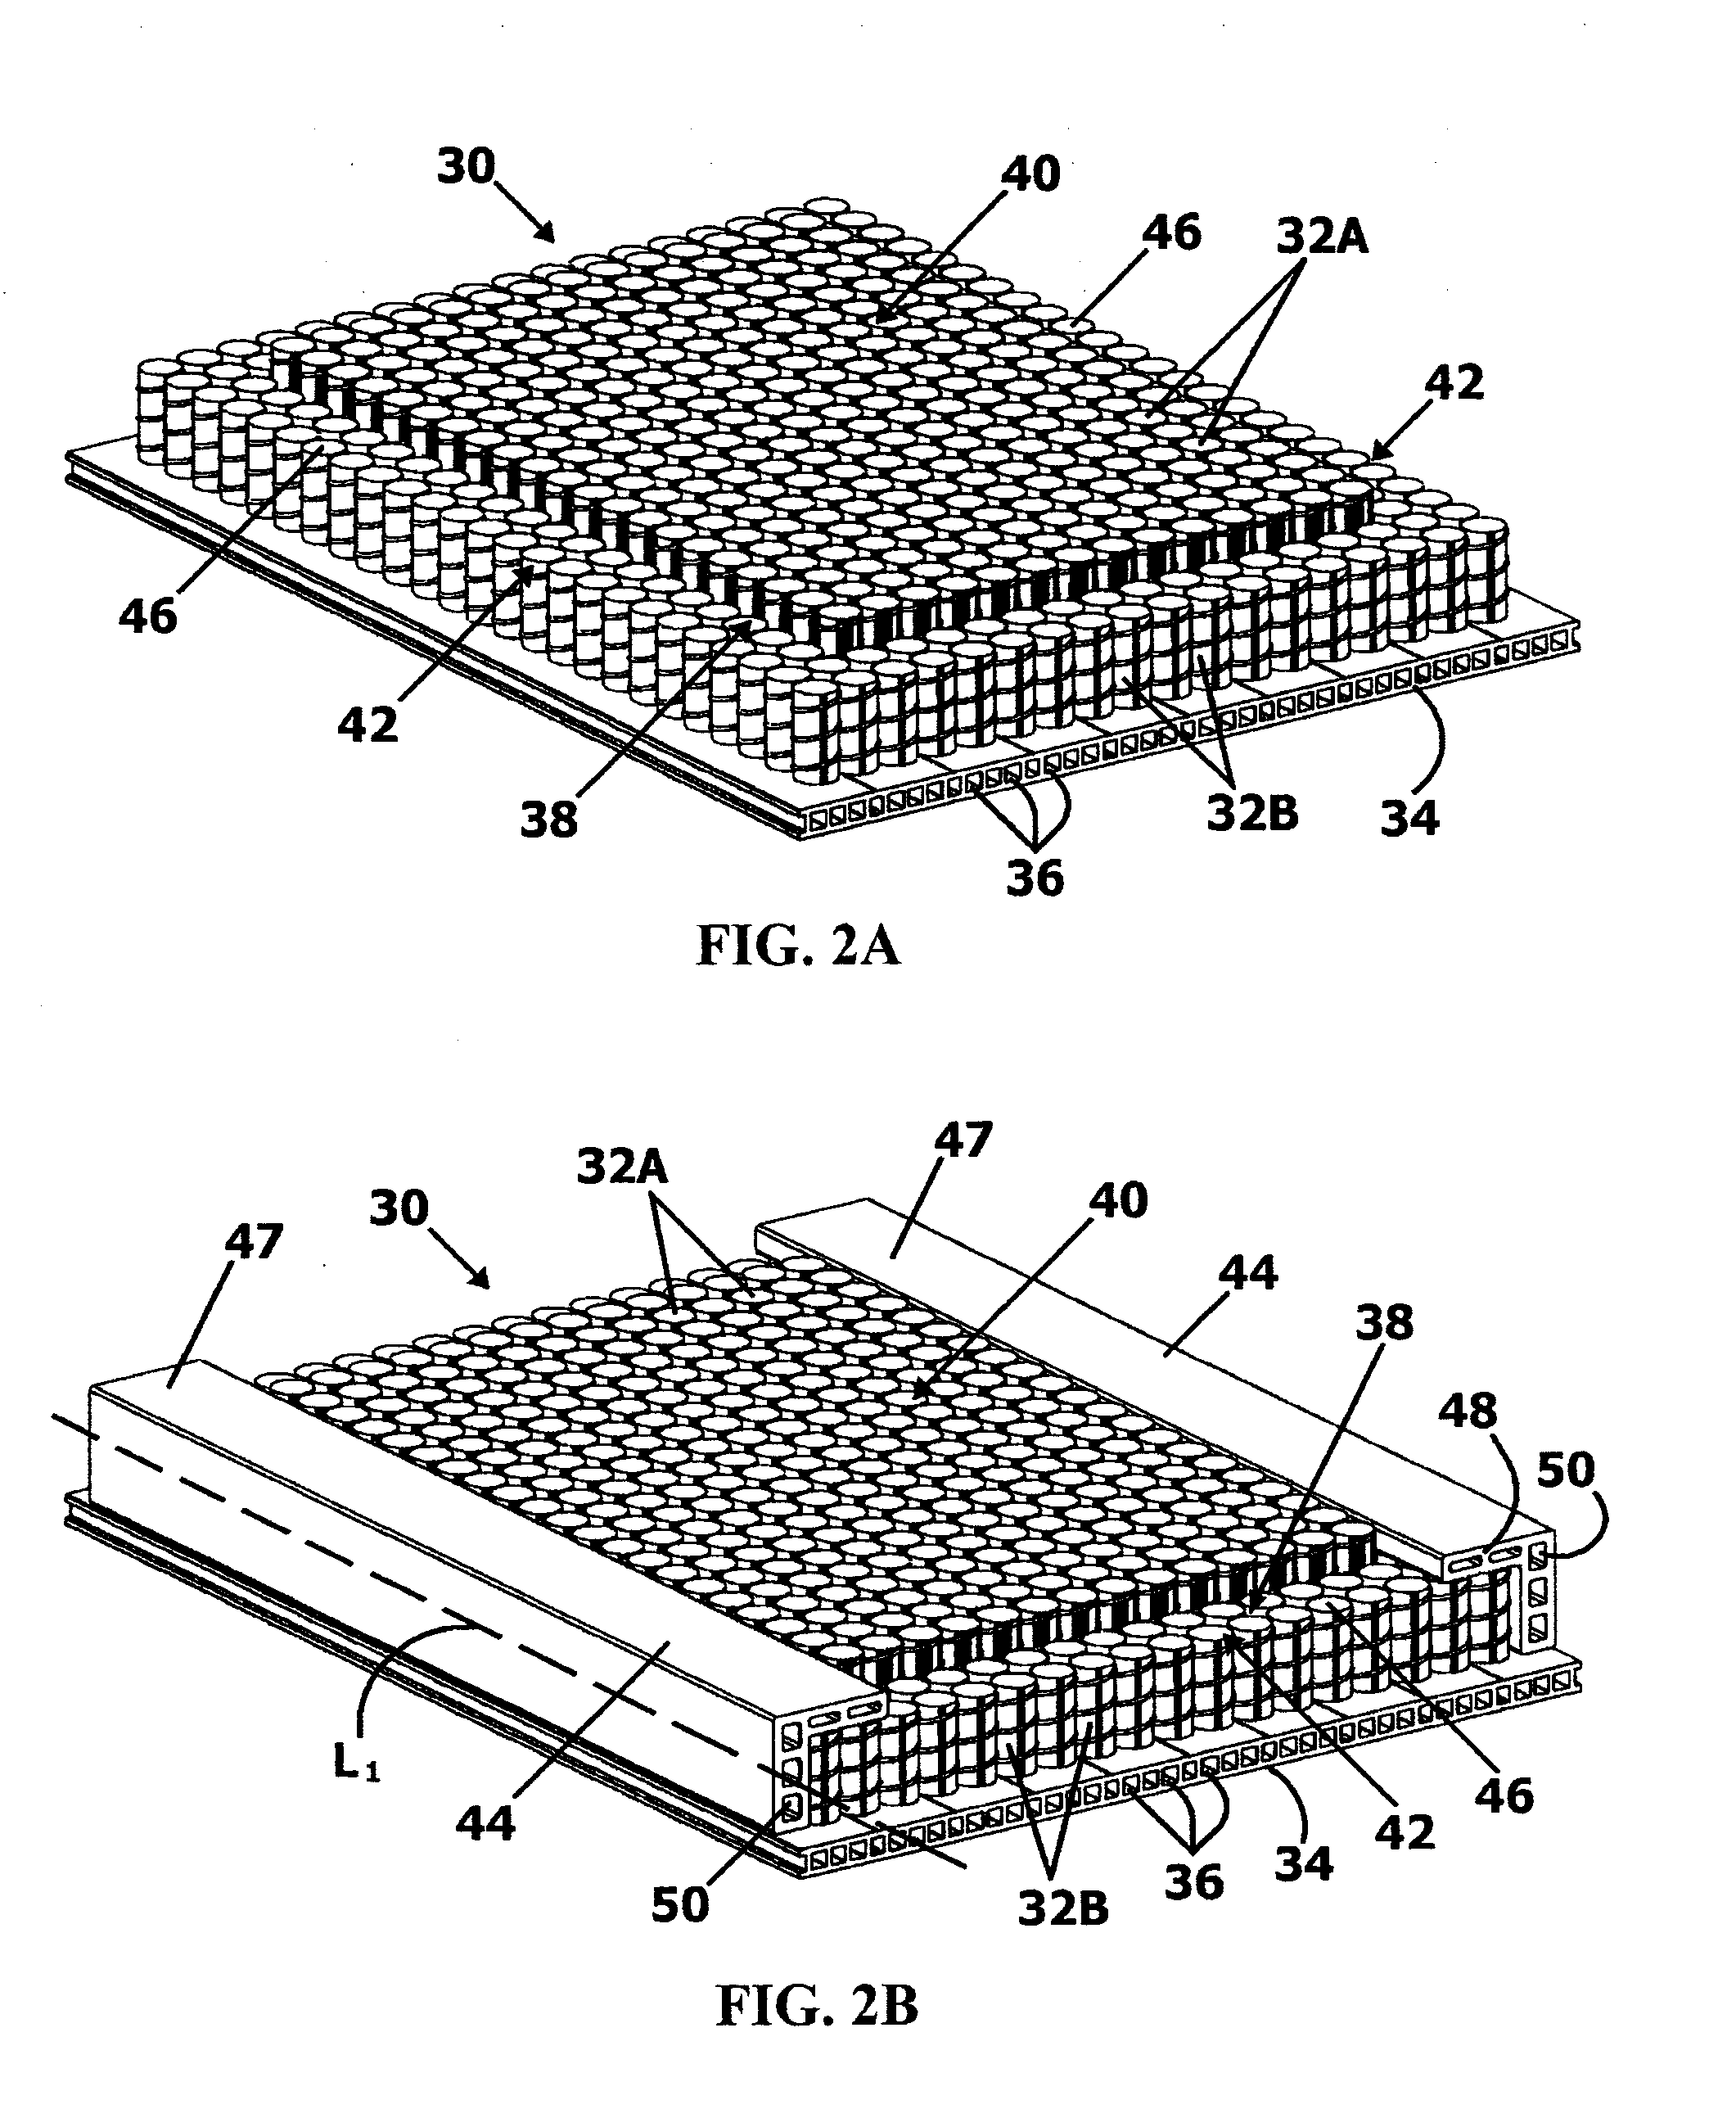 Stepped-edge and side-support members, assemblies, systems, and related methods, particularly for bedding and seating